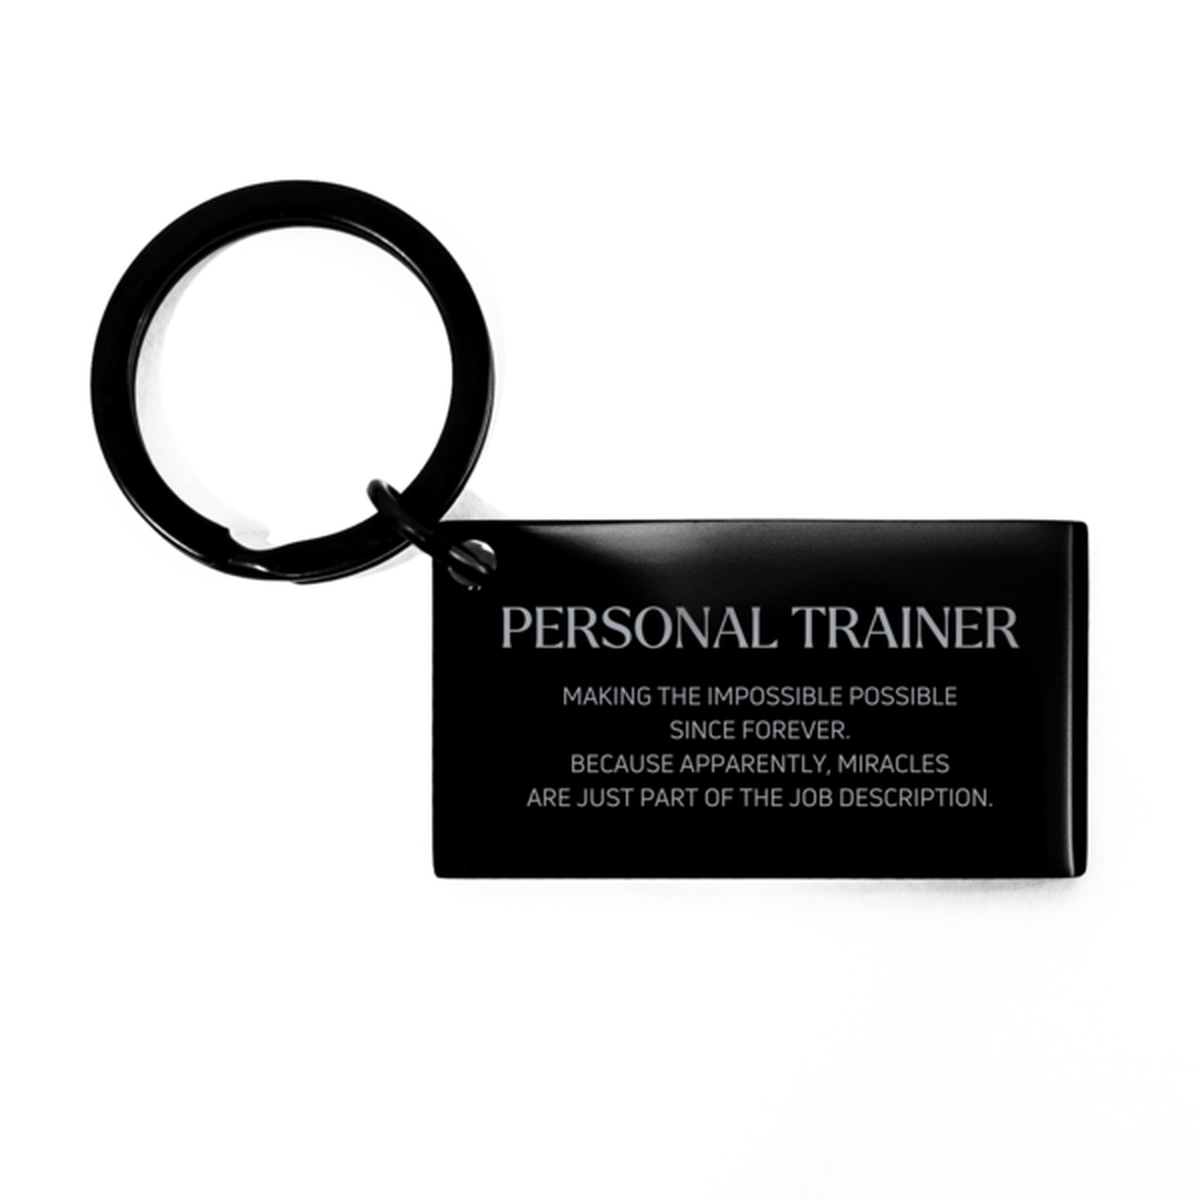 Funny Personal Trainer Gifts, Miracles are just part of the job description, Inspirational Birthday Keychain For Personal Trainer, Men, Women, Coworkers, Friends, Boss